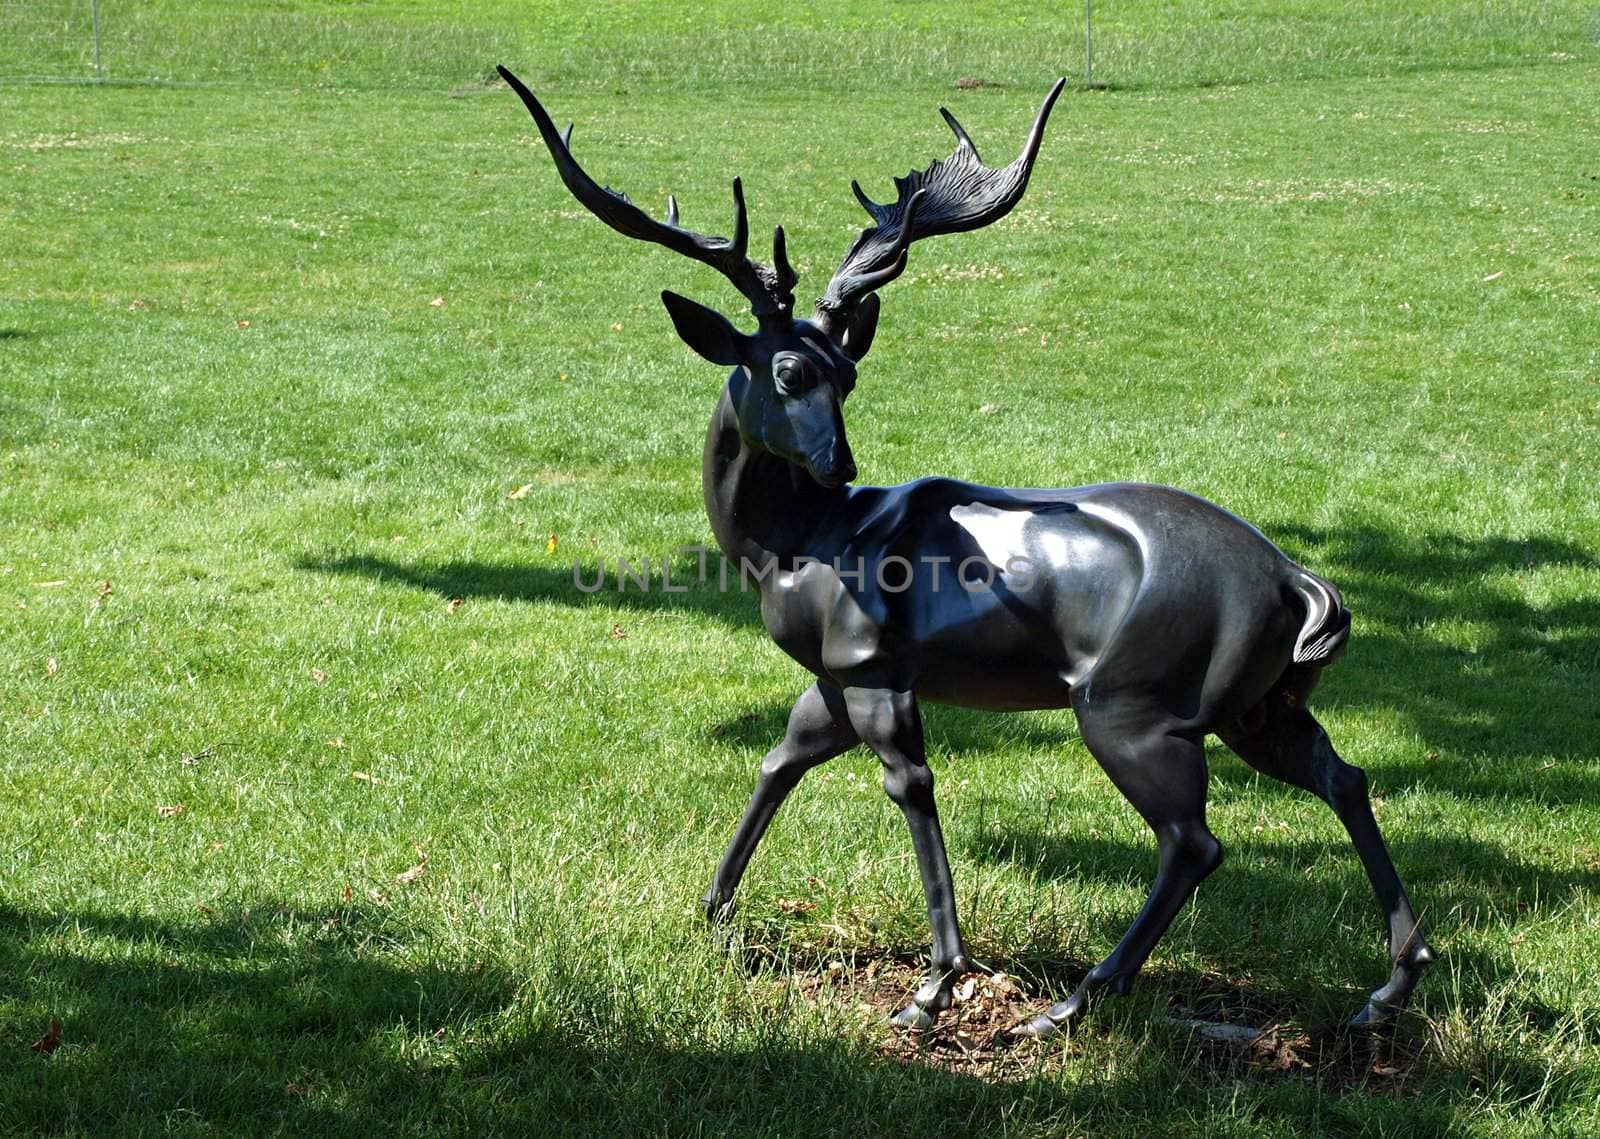 Medieval Deer Statue by Ronyzmbow